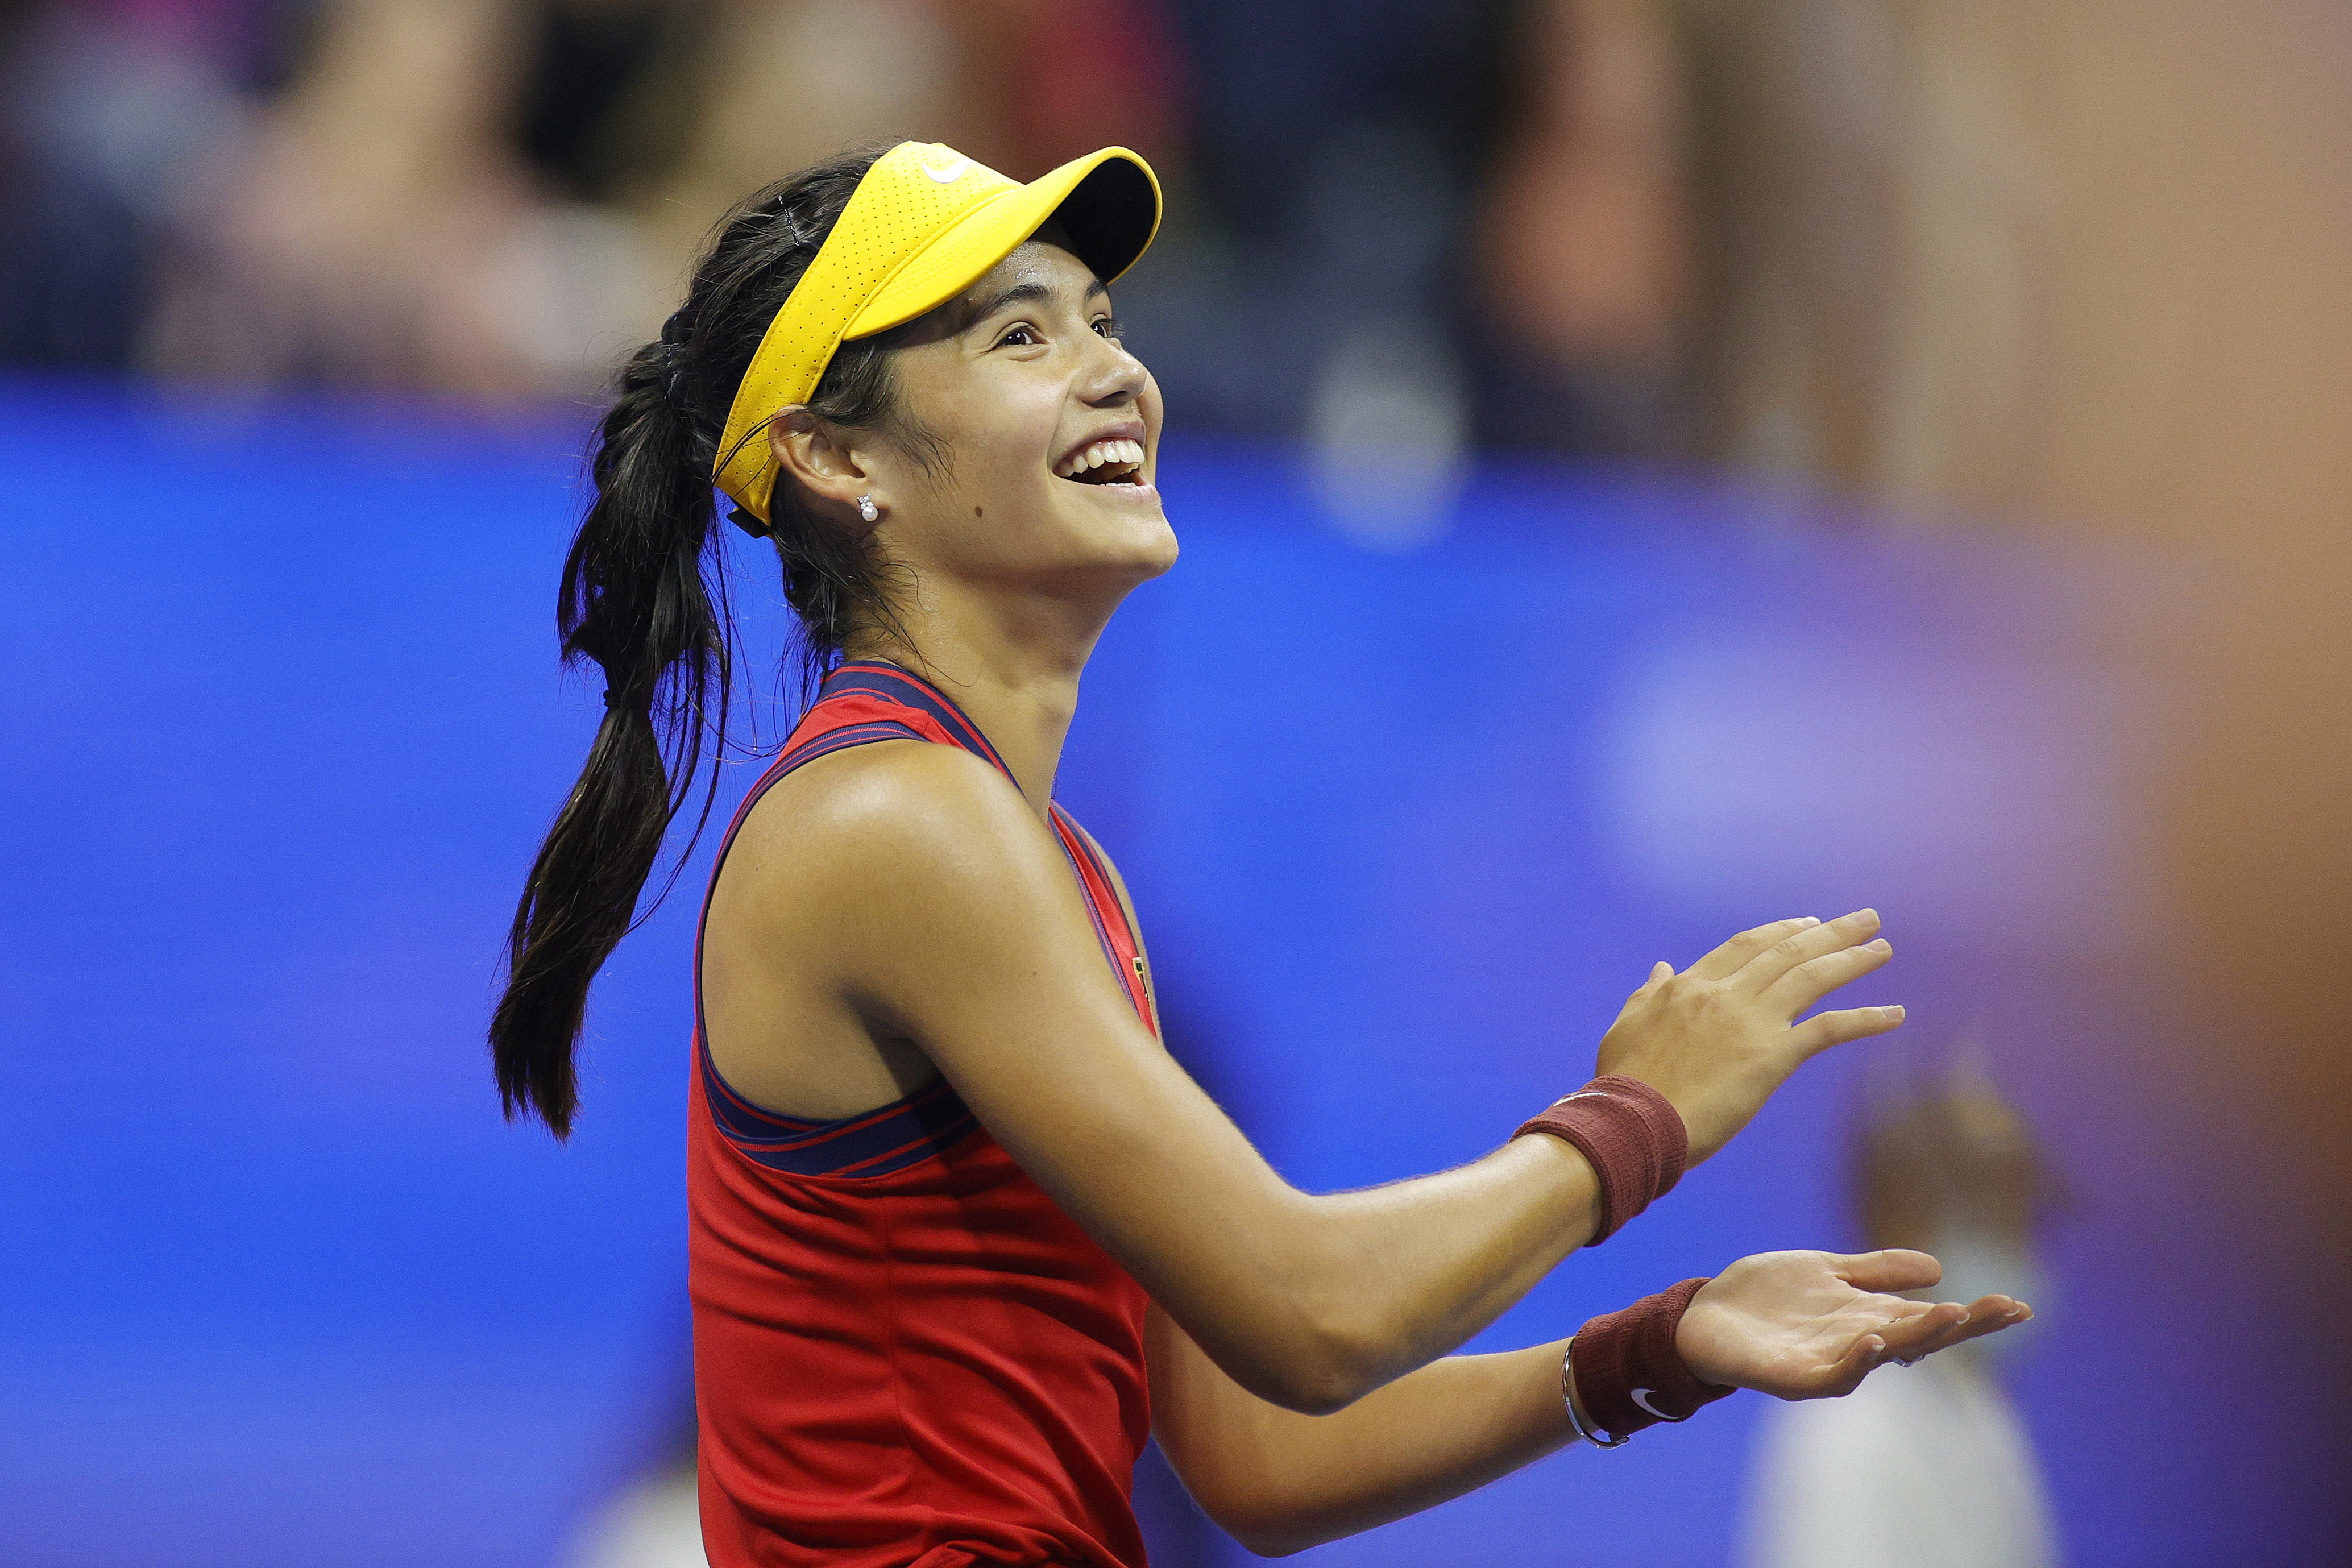 Channel 4 to show live US Open Final with Emma Raducanu, BBC will air highlights What to Watch